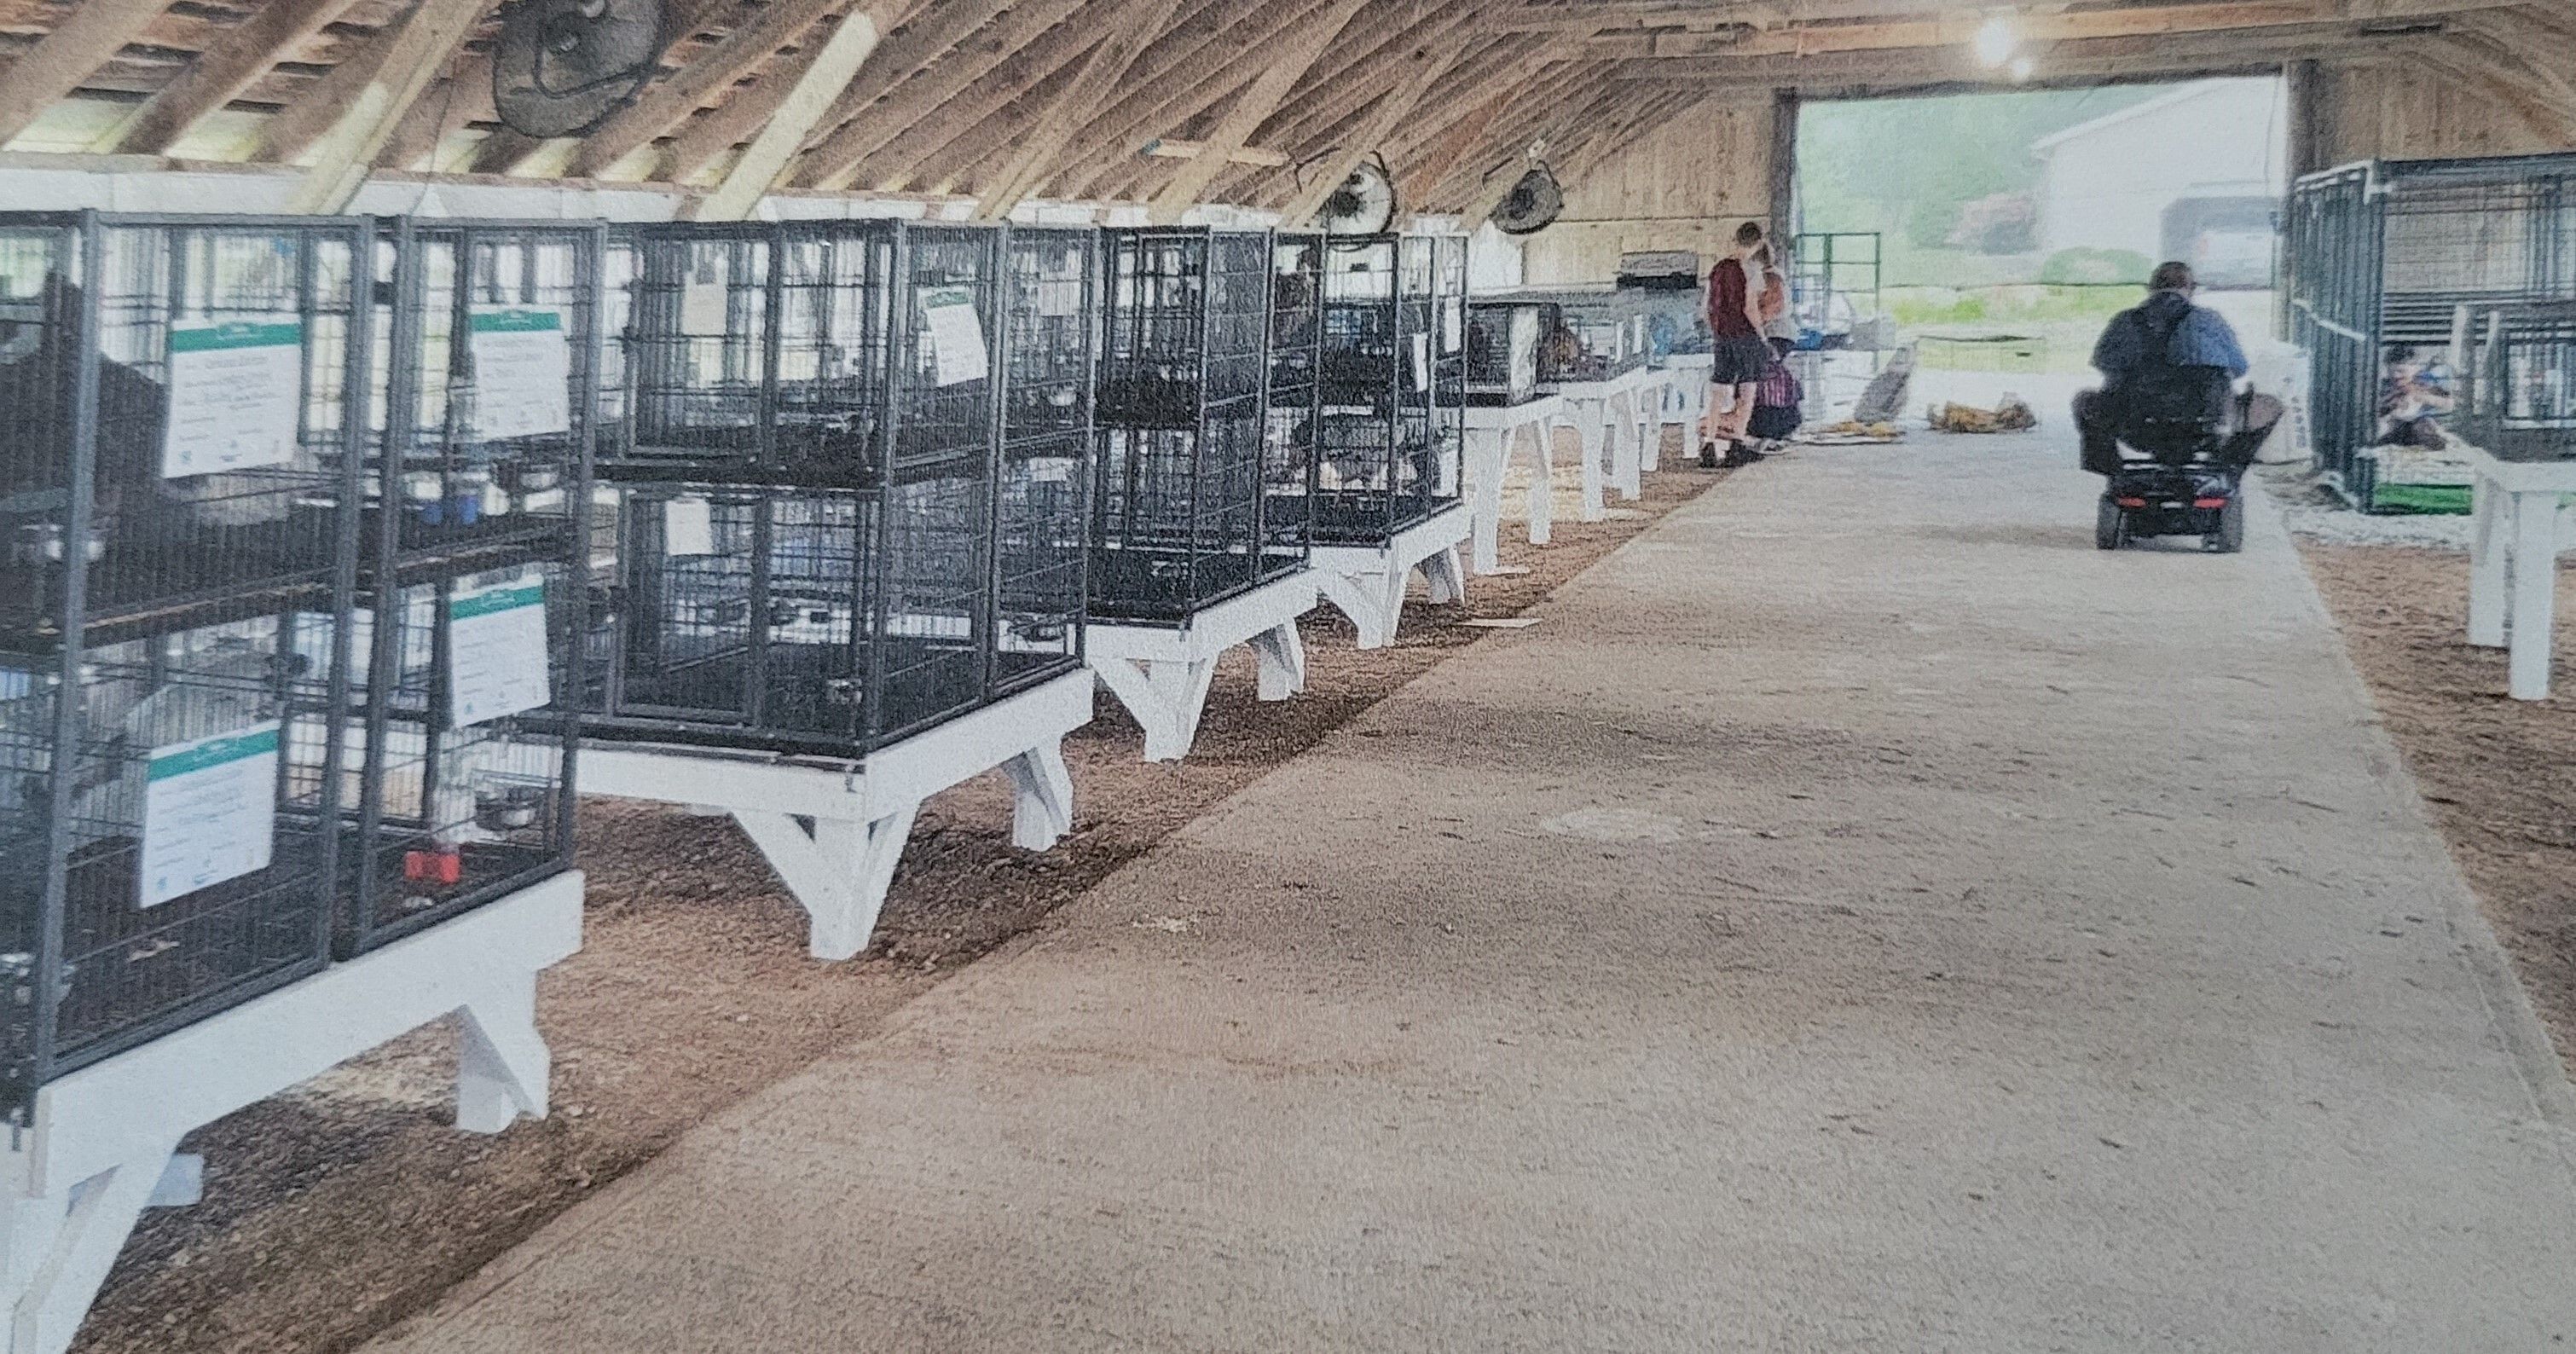 Small animal cages - Union County Fairground